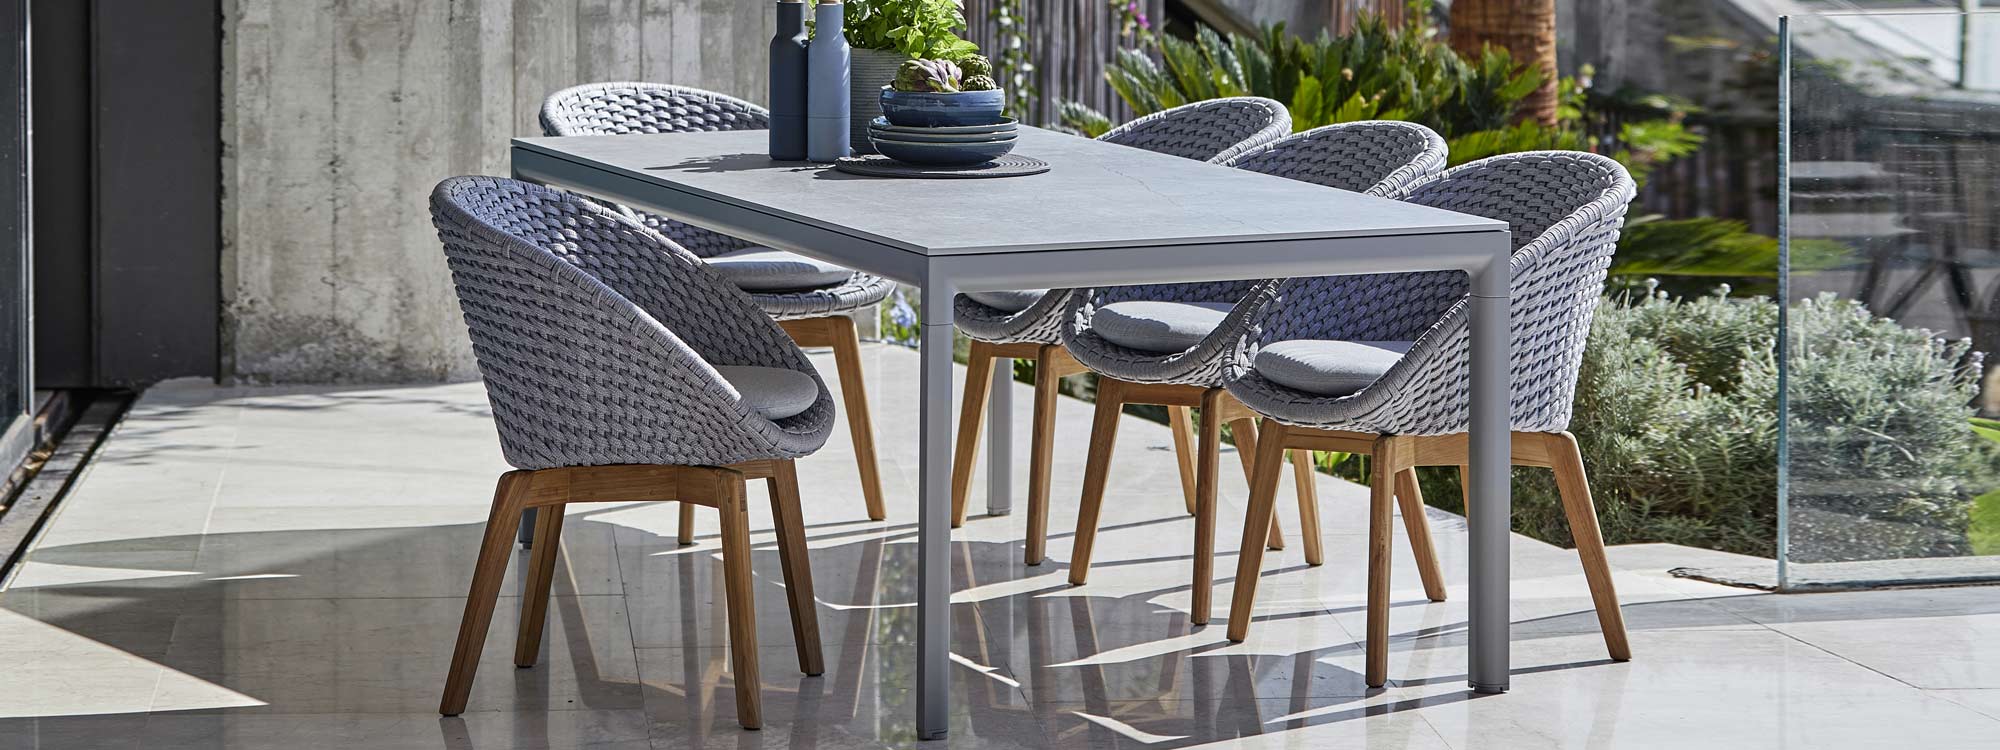 Drop Table & Peacock modern garden dining chair by Cane-line from Encompass